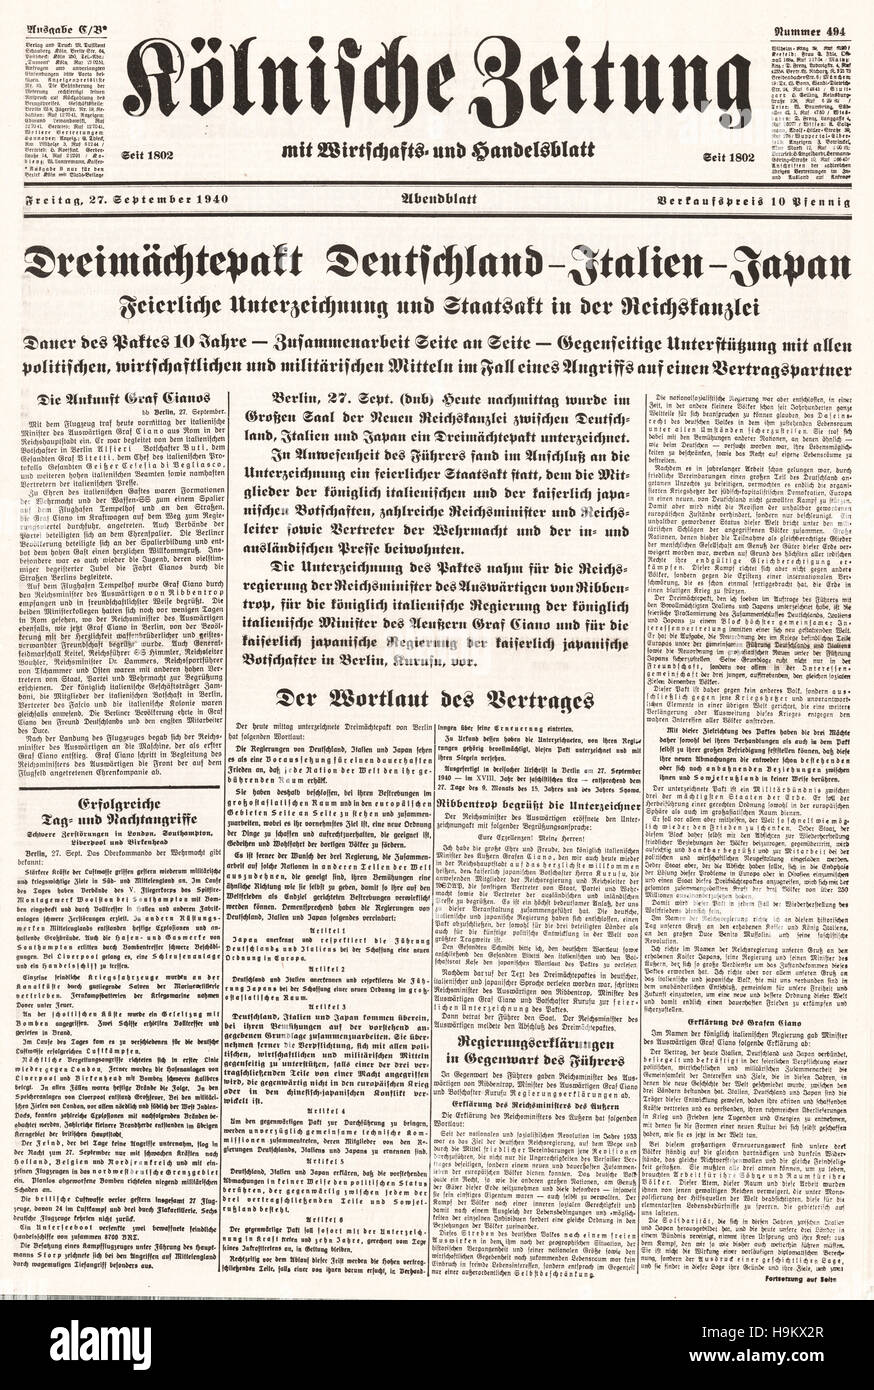 1940 Kolnischer Zeitung  front page (Germany) Germany, Italy and Japan signed the Tripartite Pact Stock Photo